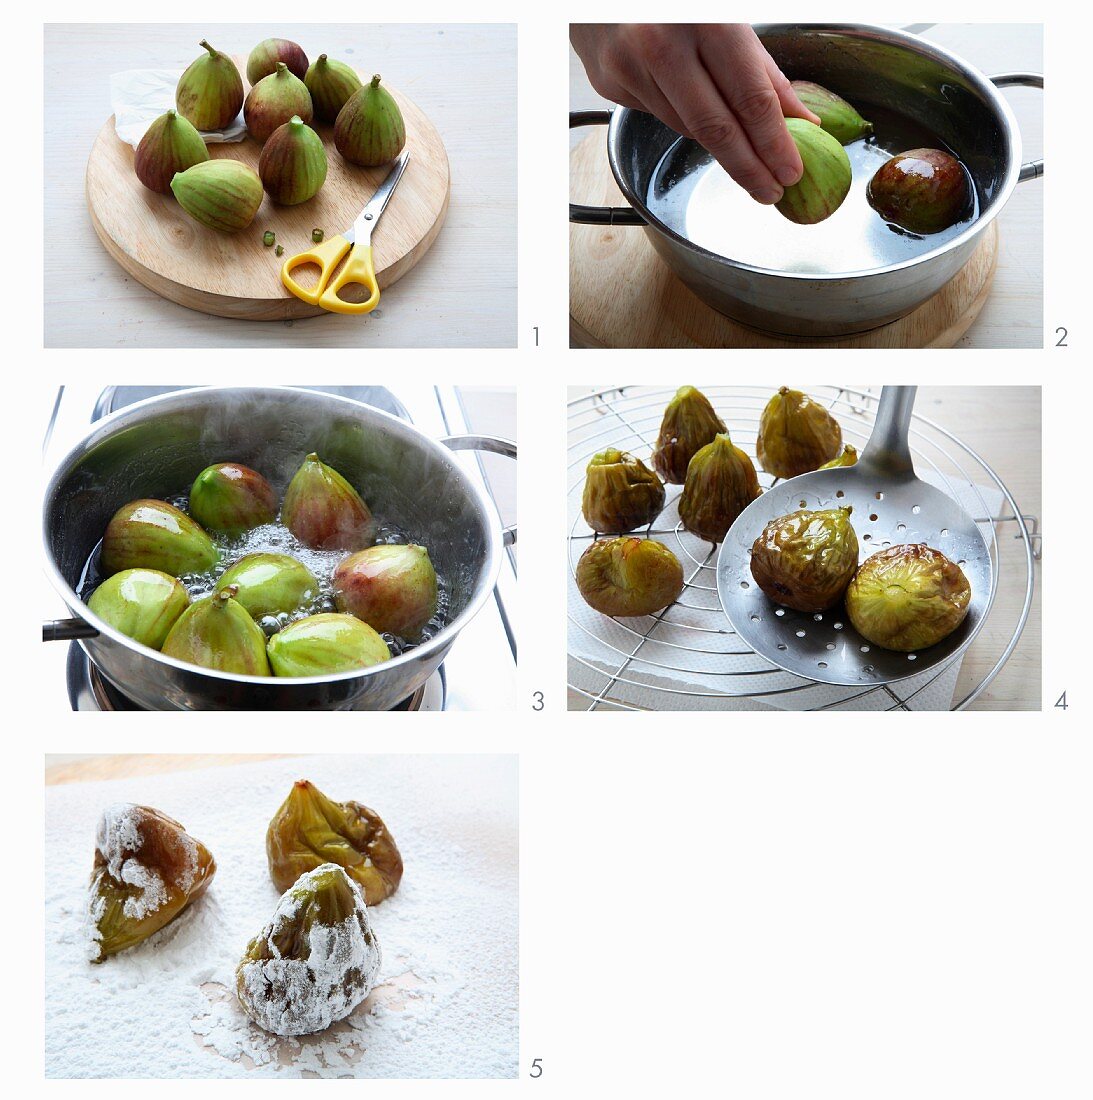 Figs being candied in vanilla syrup